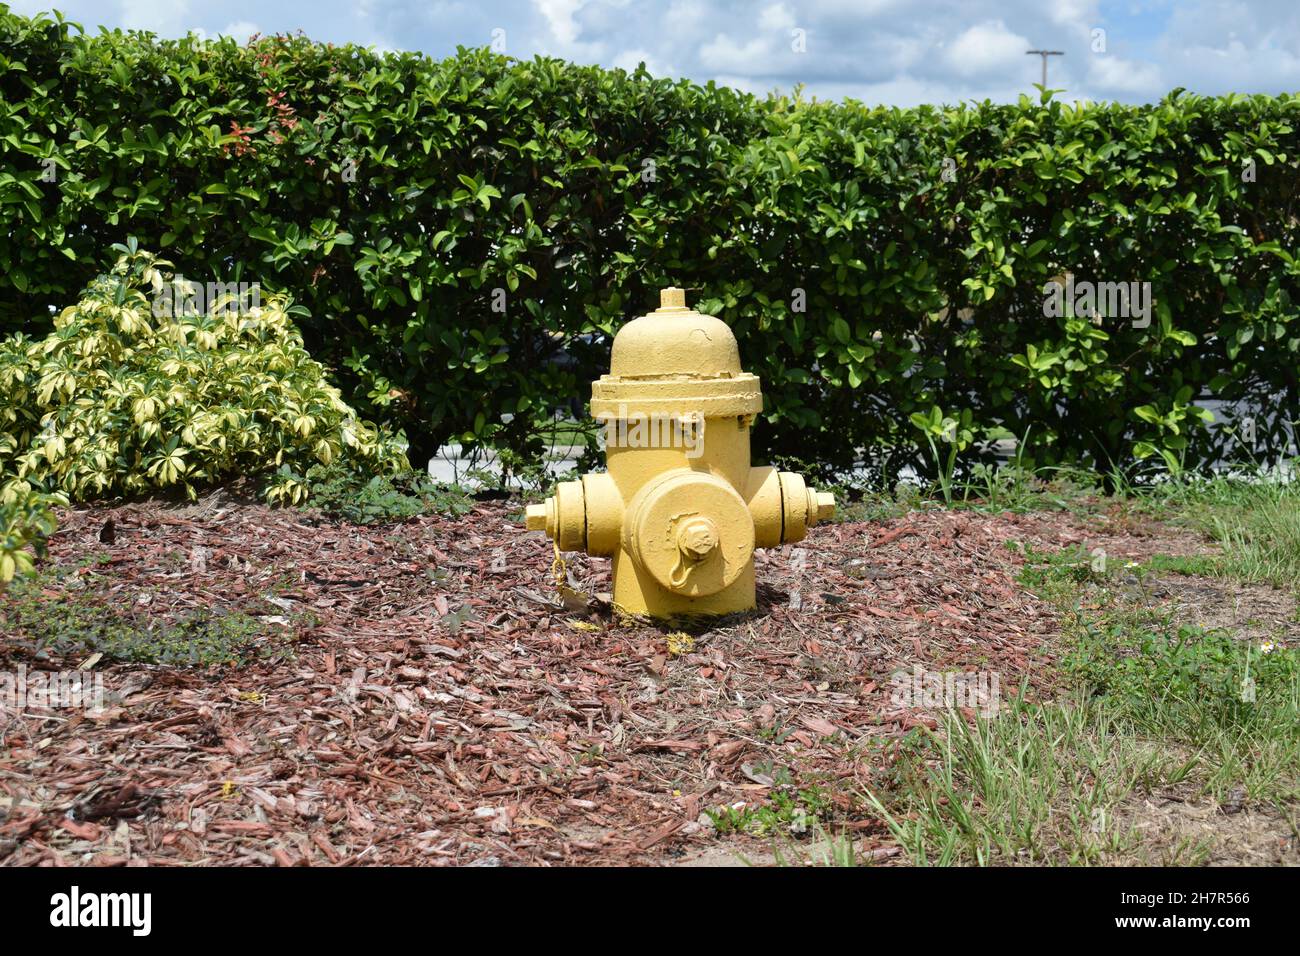 A small yellow fire hydrant shows its age. Stock Photo